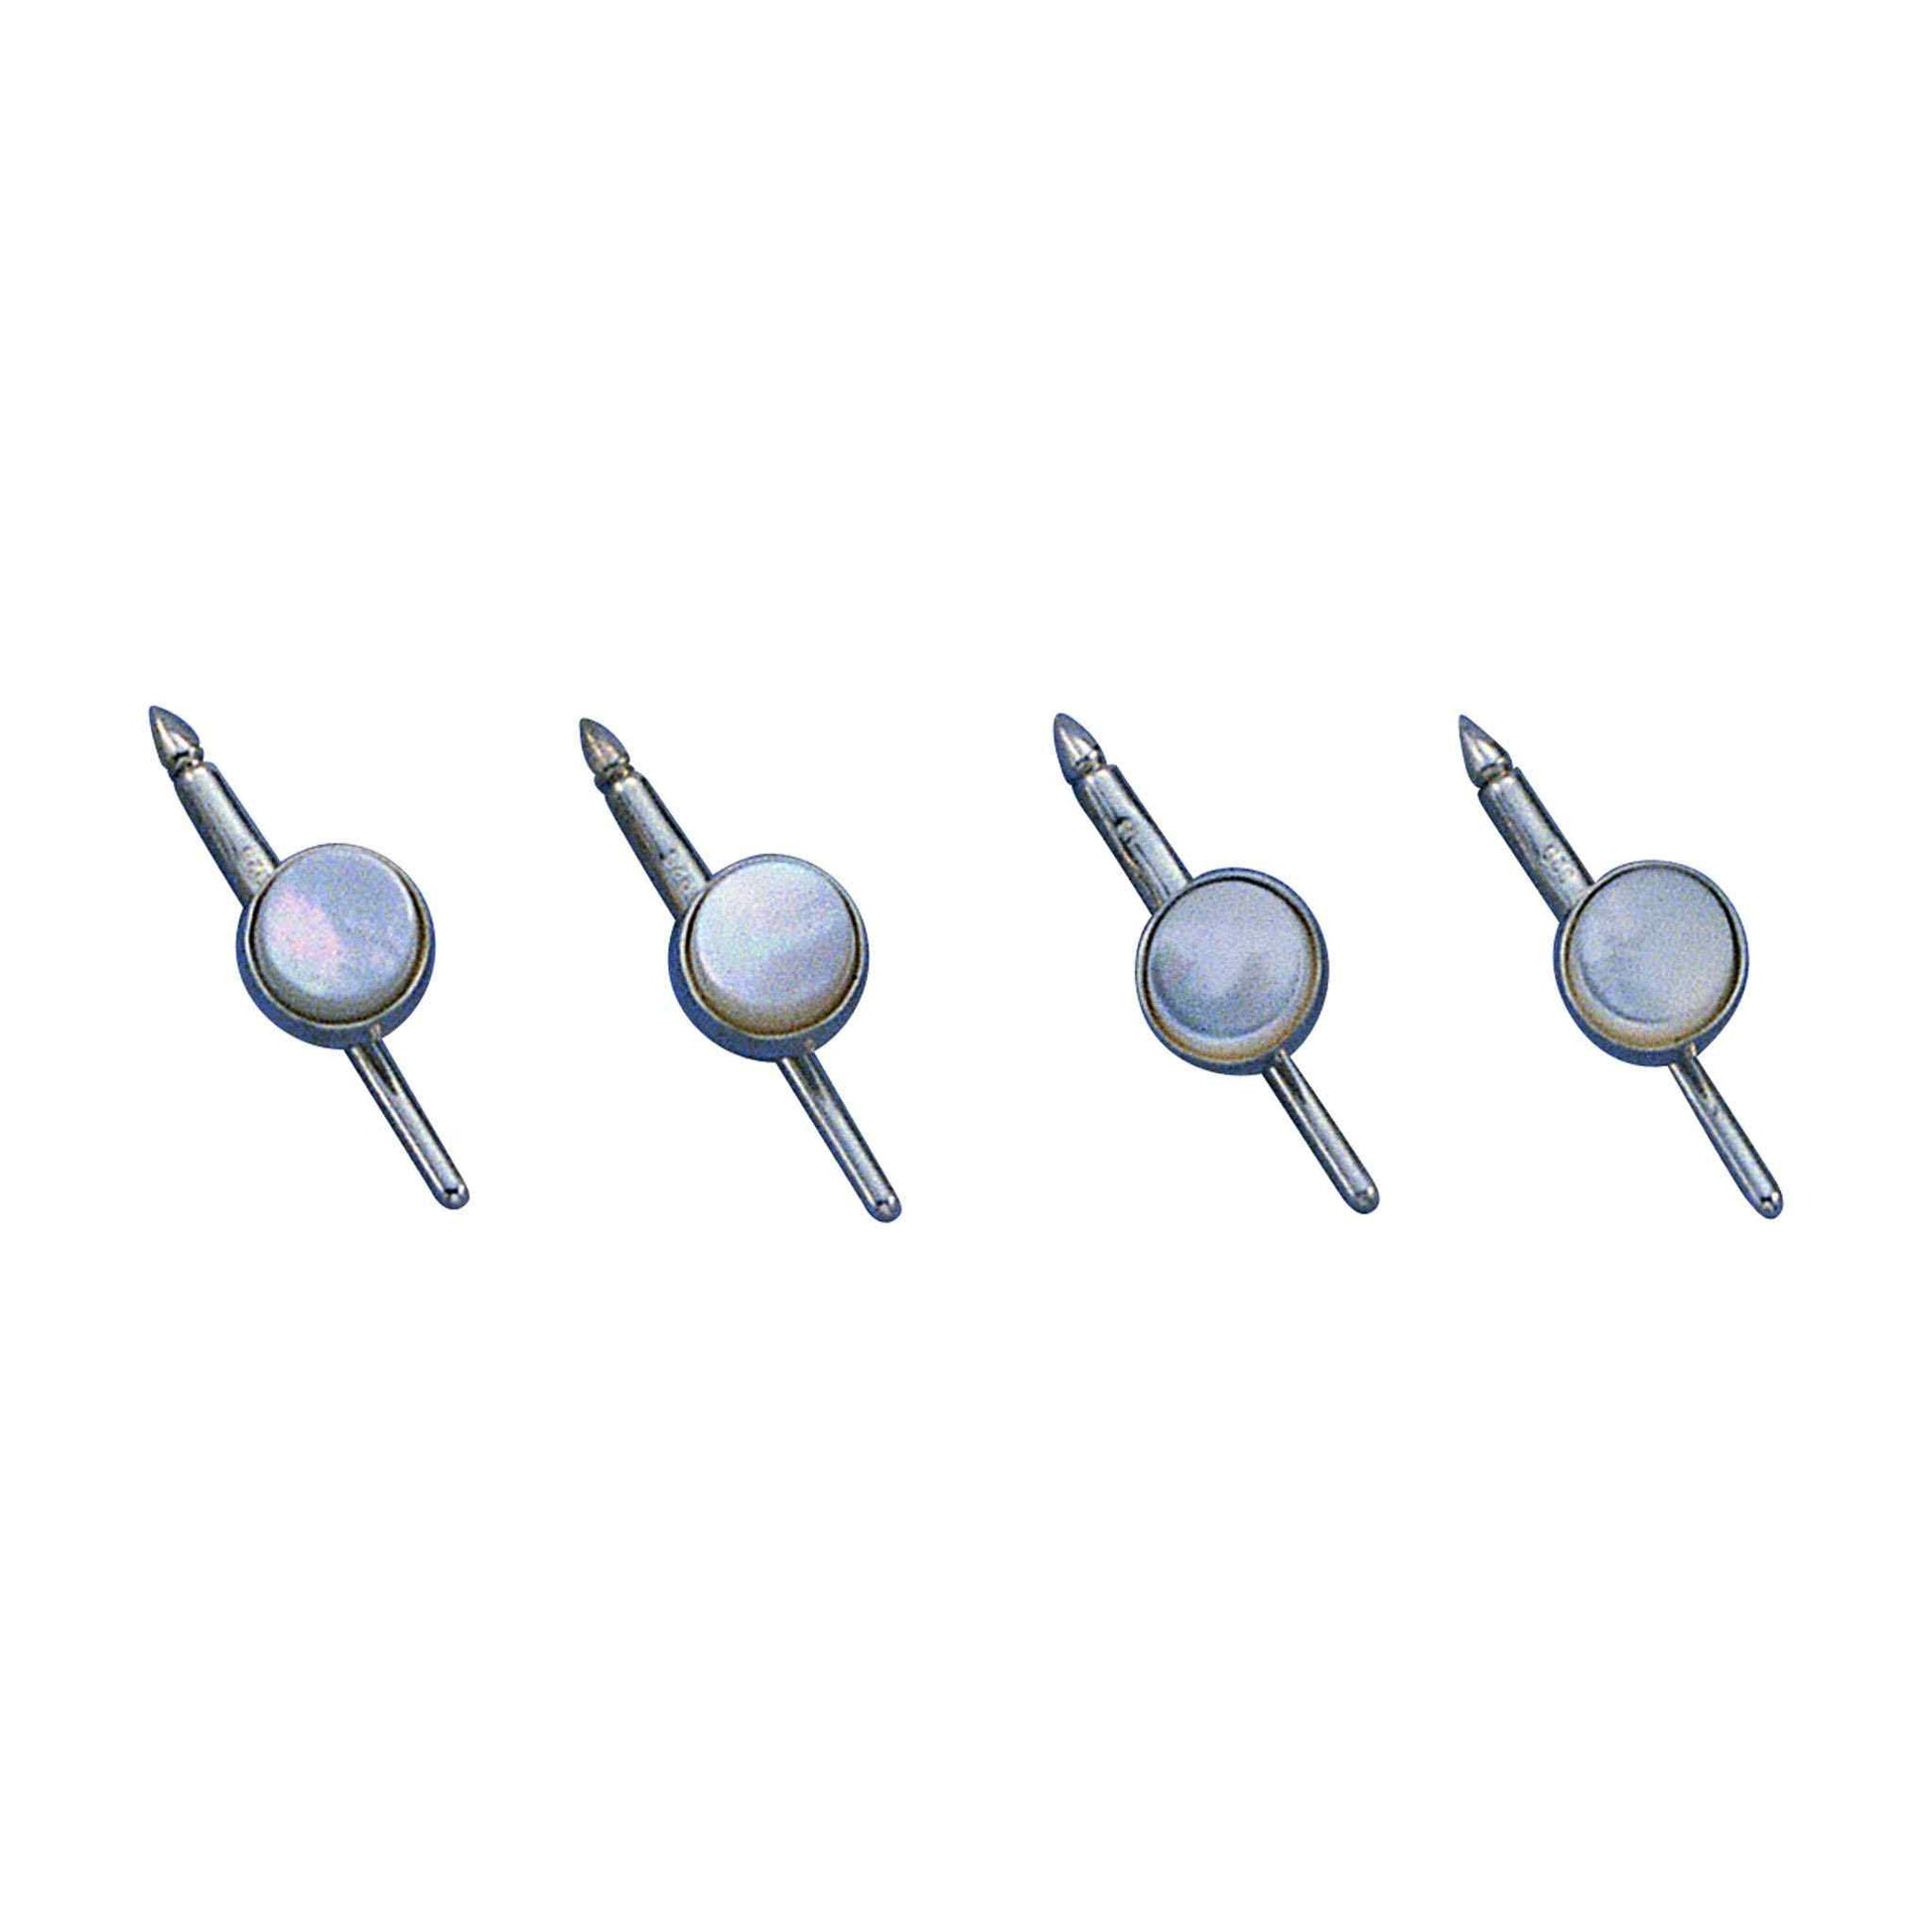 A four piece sterling silver round mother of pearl stud set displayed on a neutral white background.